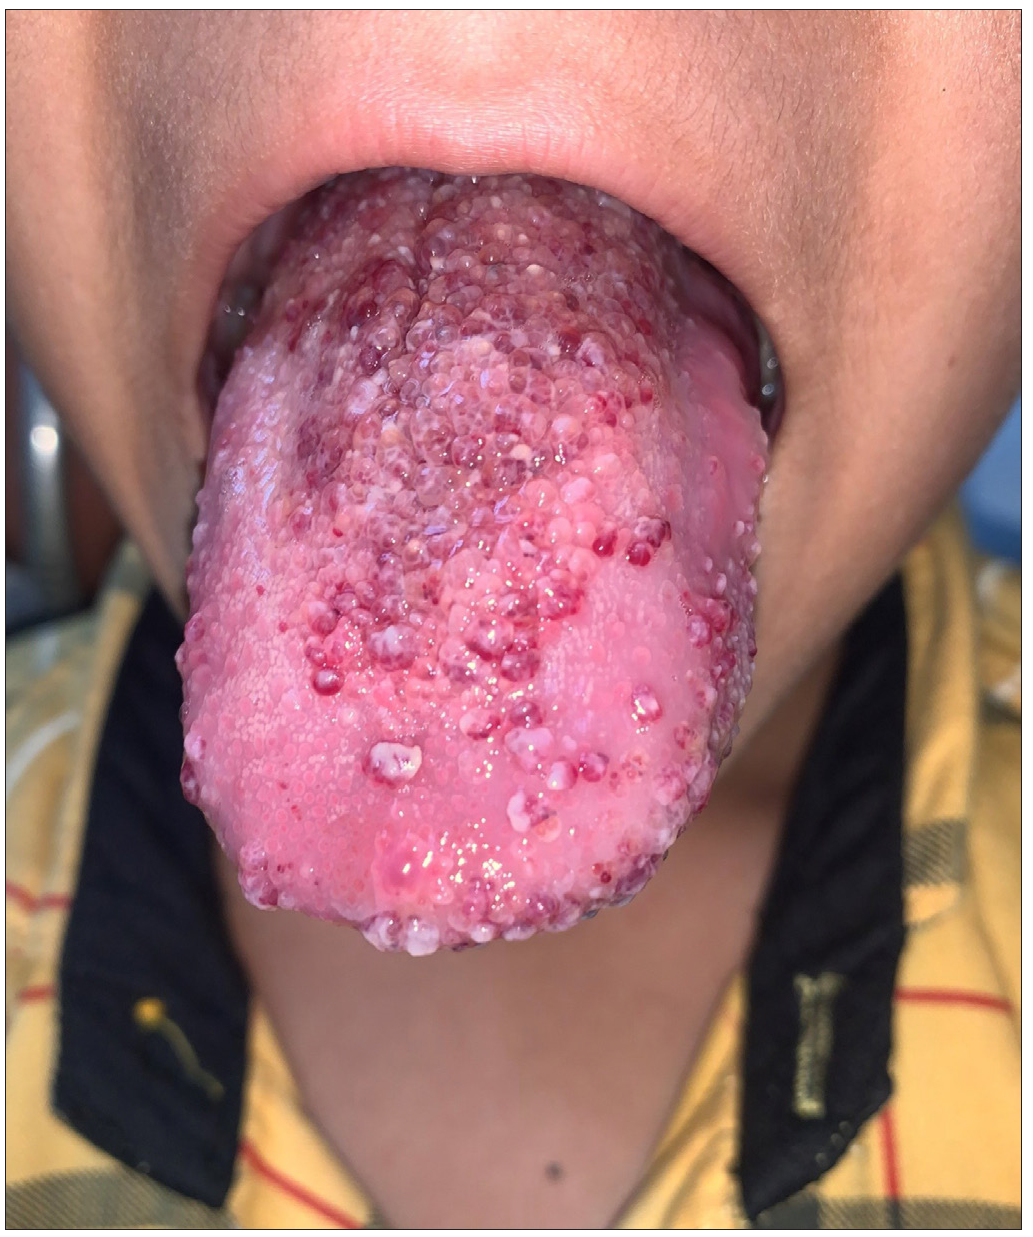 Diffuse infiltration of the tongue with multiple clear-fluid filled and haemmorhagic vesicles at baseline.